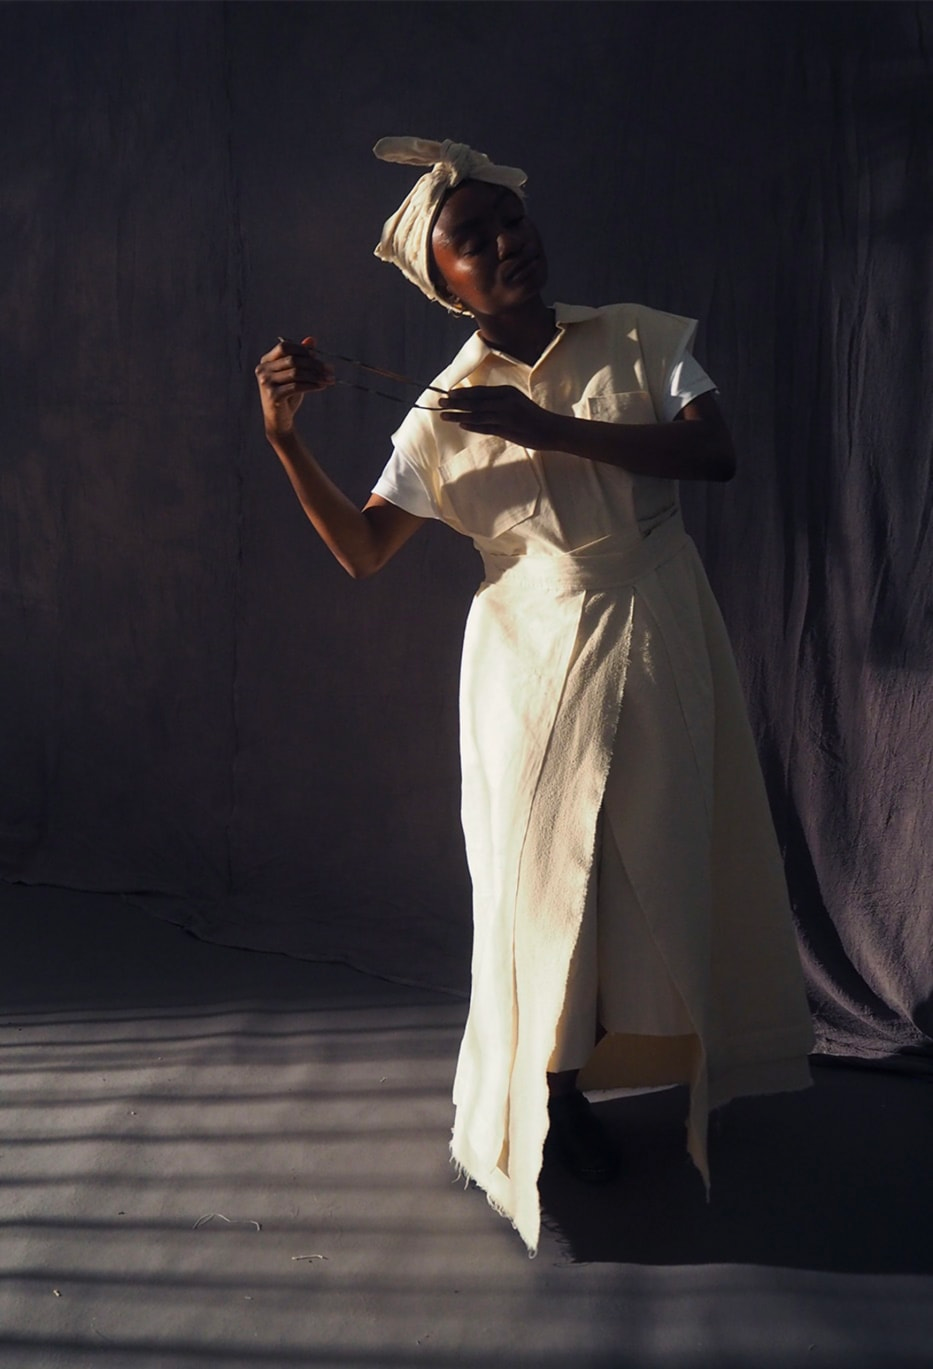 An image of a black woman in white-cream robes, partially in shadow, standing in a room with her eyes closed, holding an object, and leaning slightly to one side.